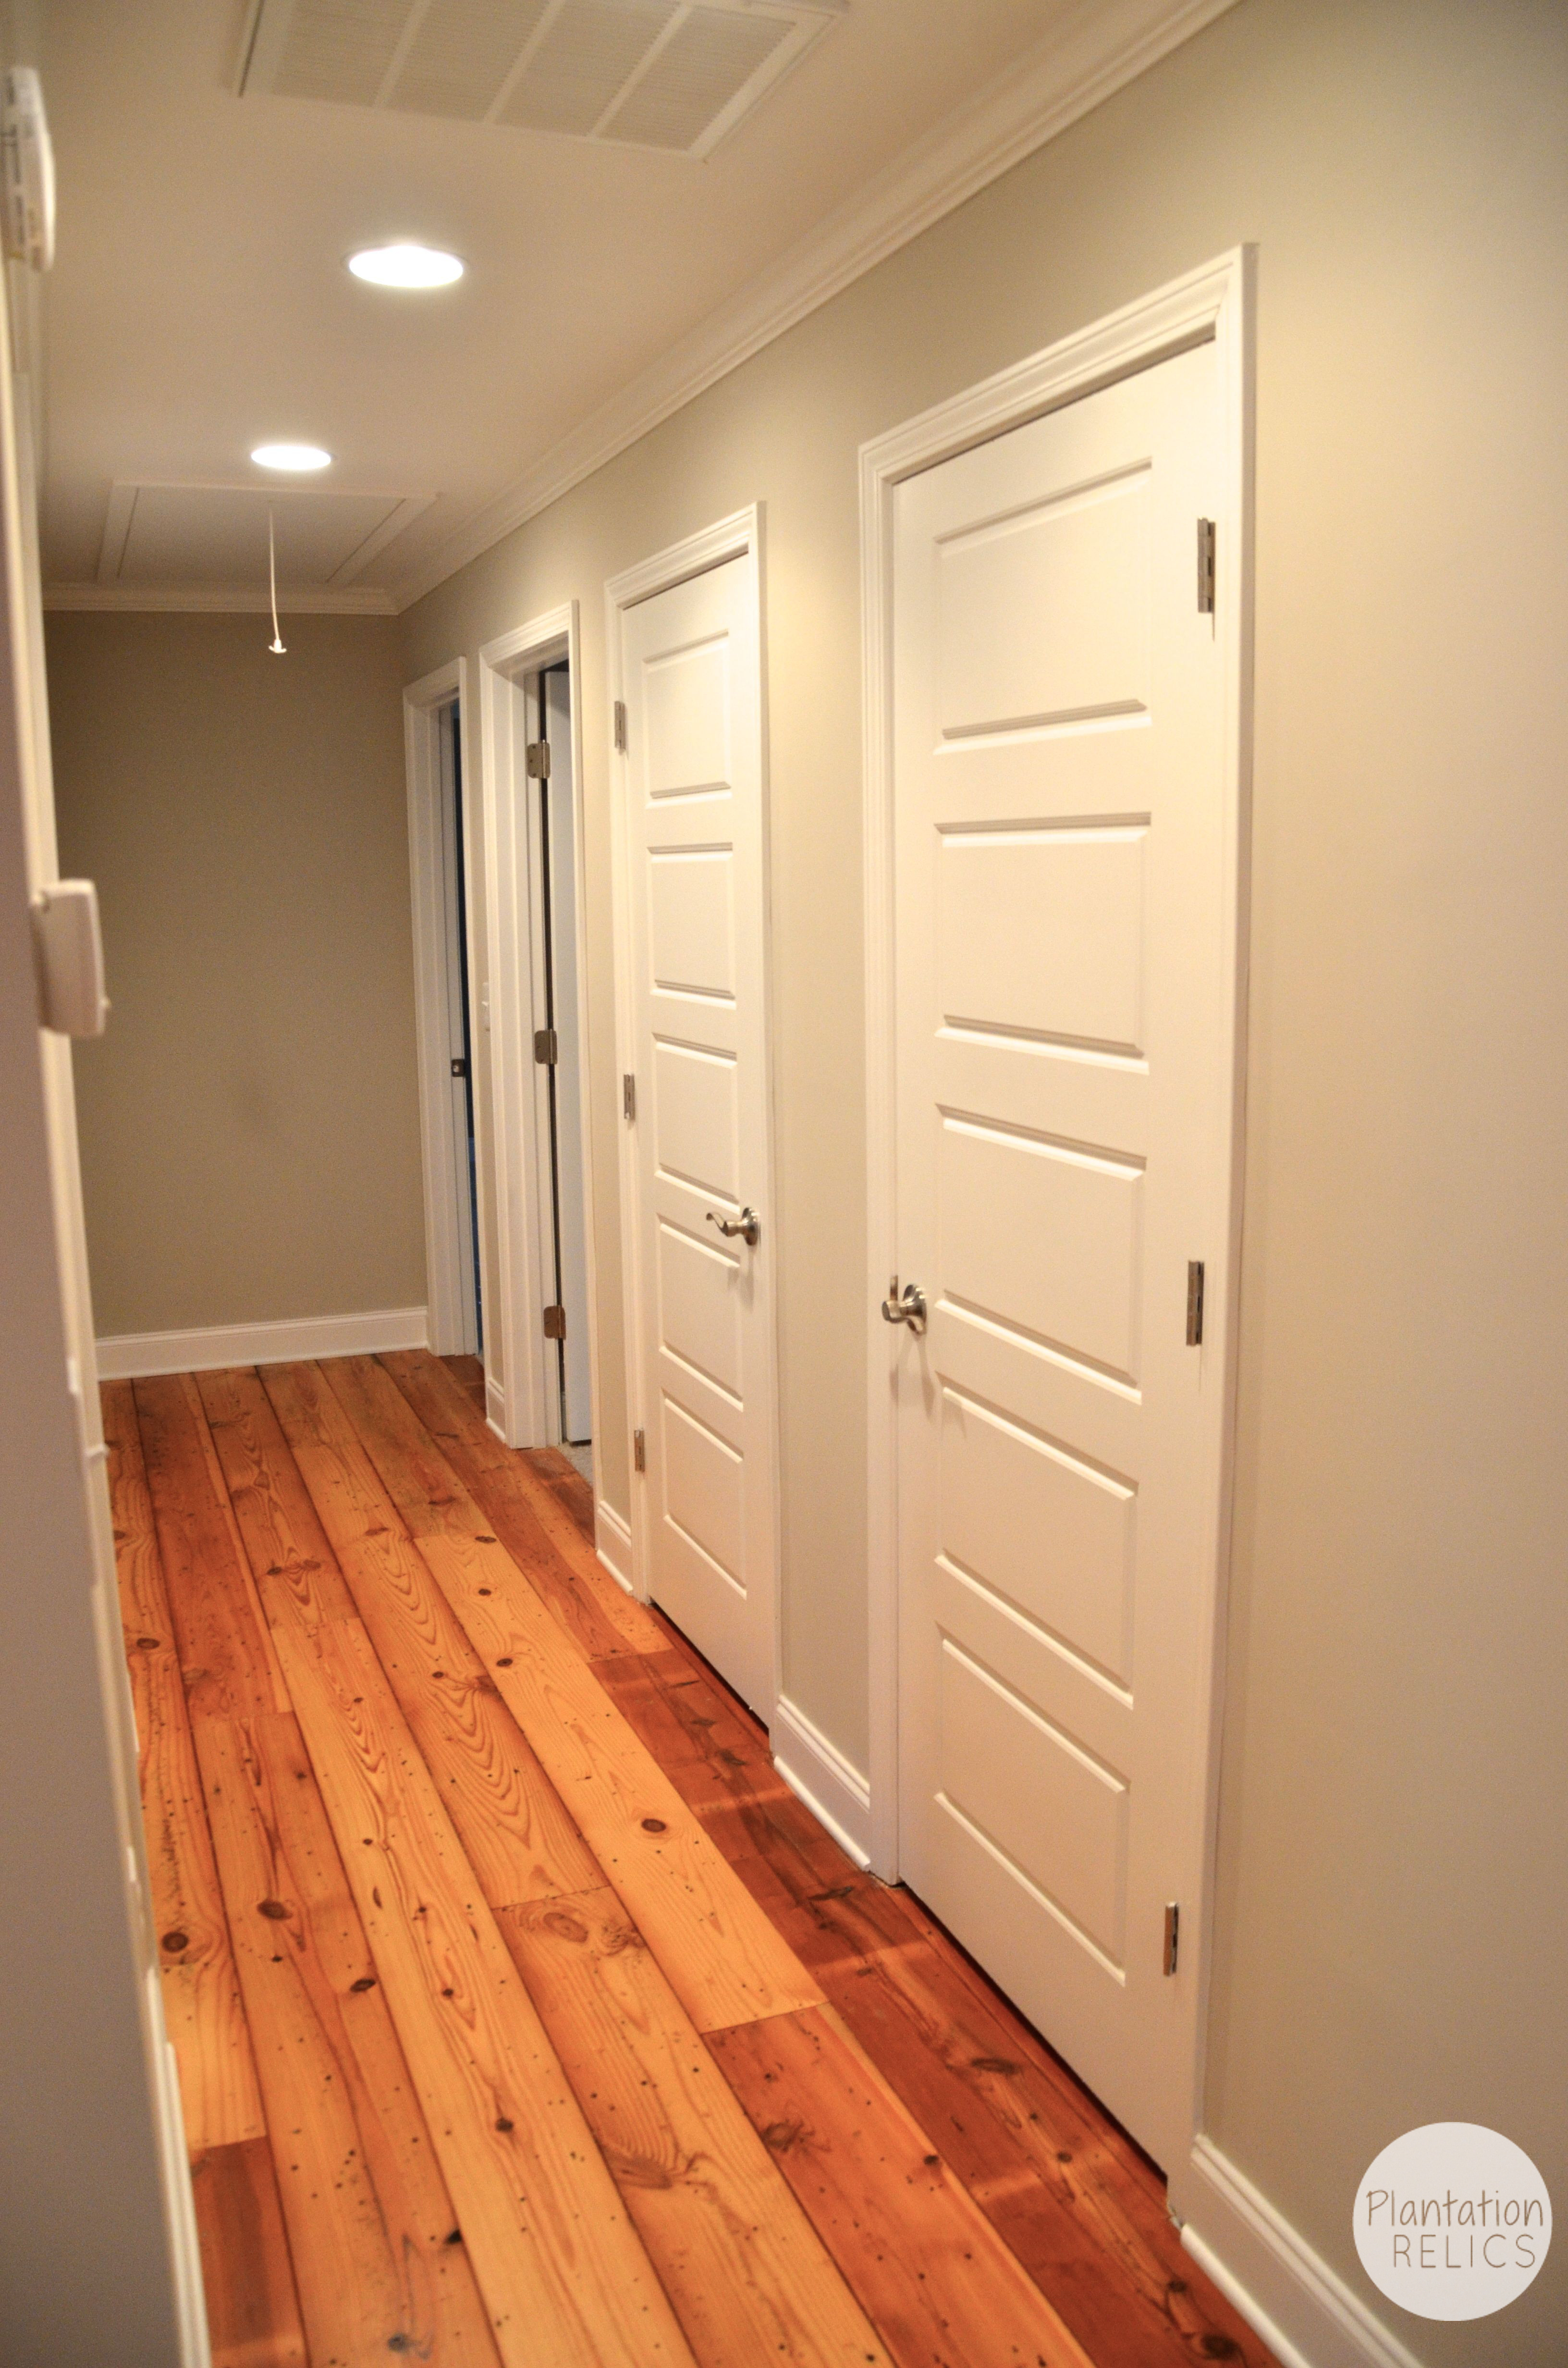 Flip #1 Bedrooms and Hallway–The Final AFTER of the Inside